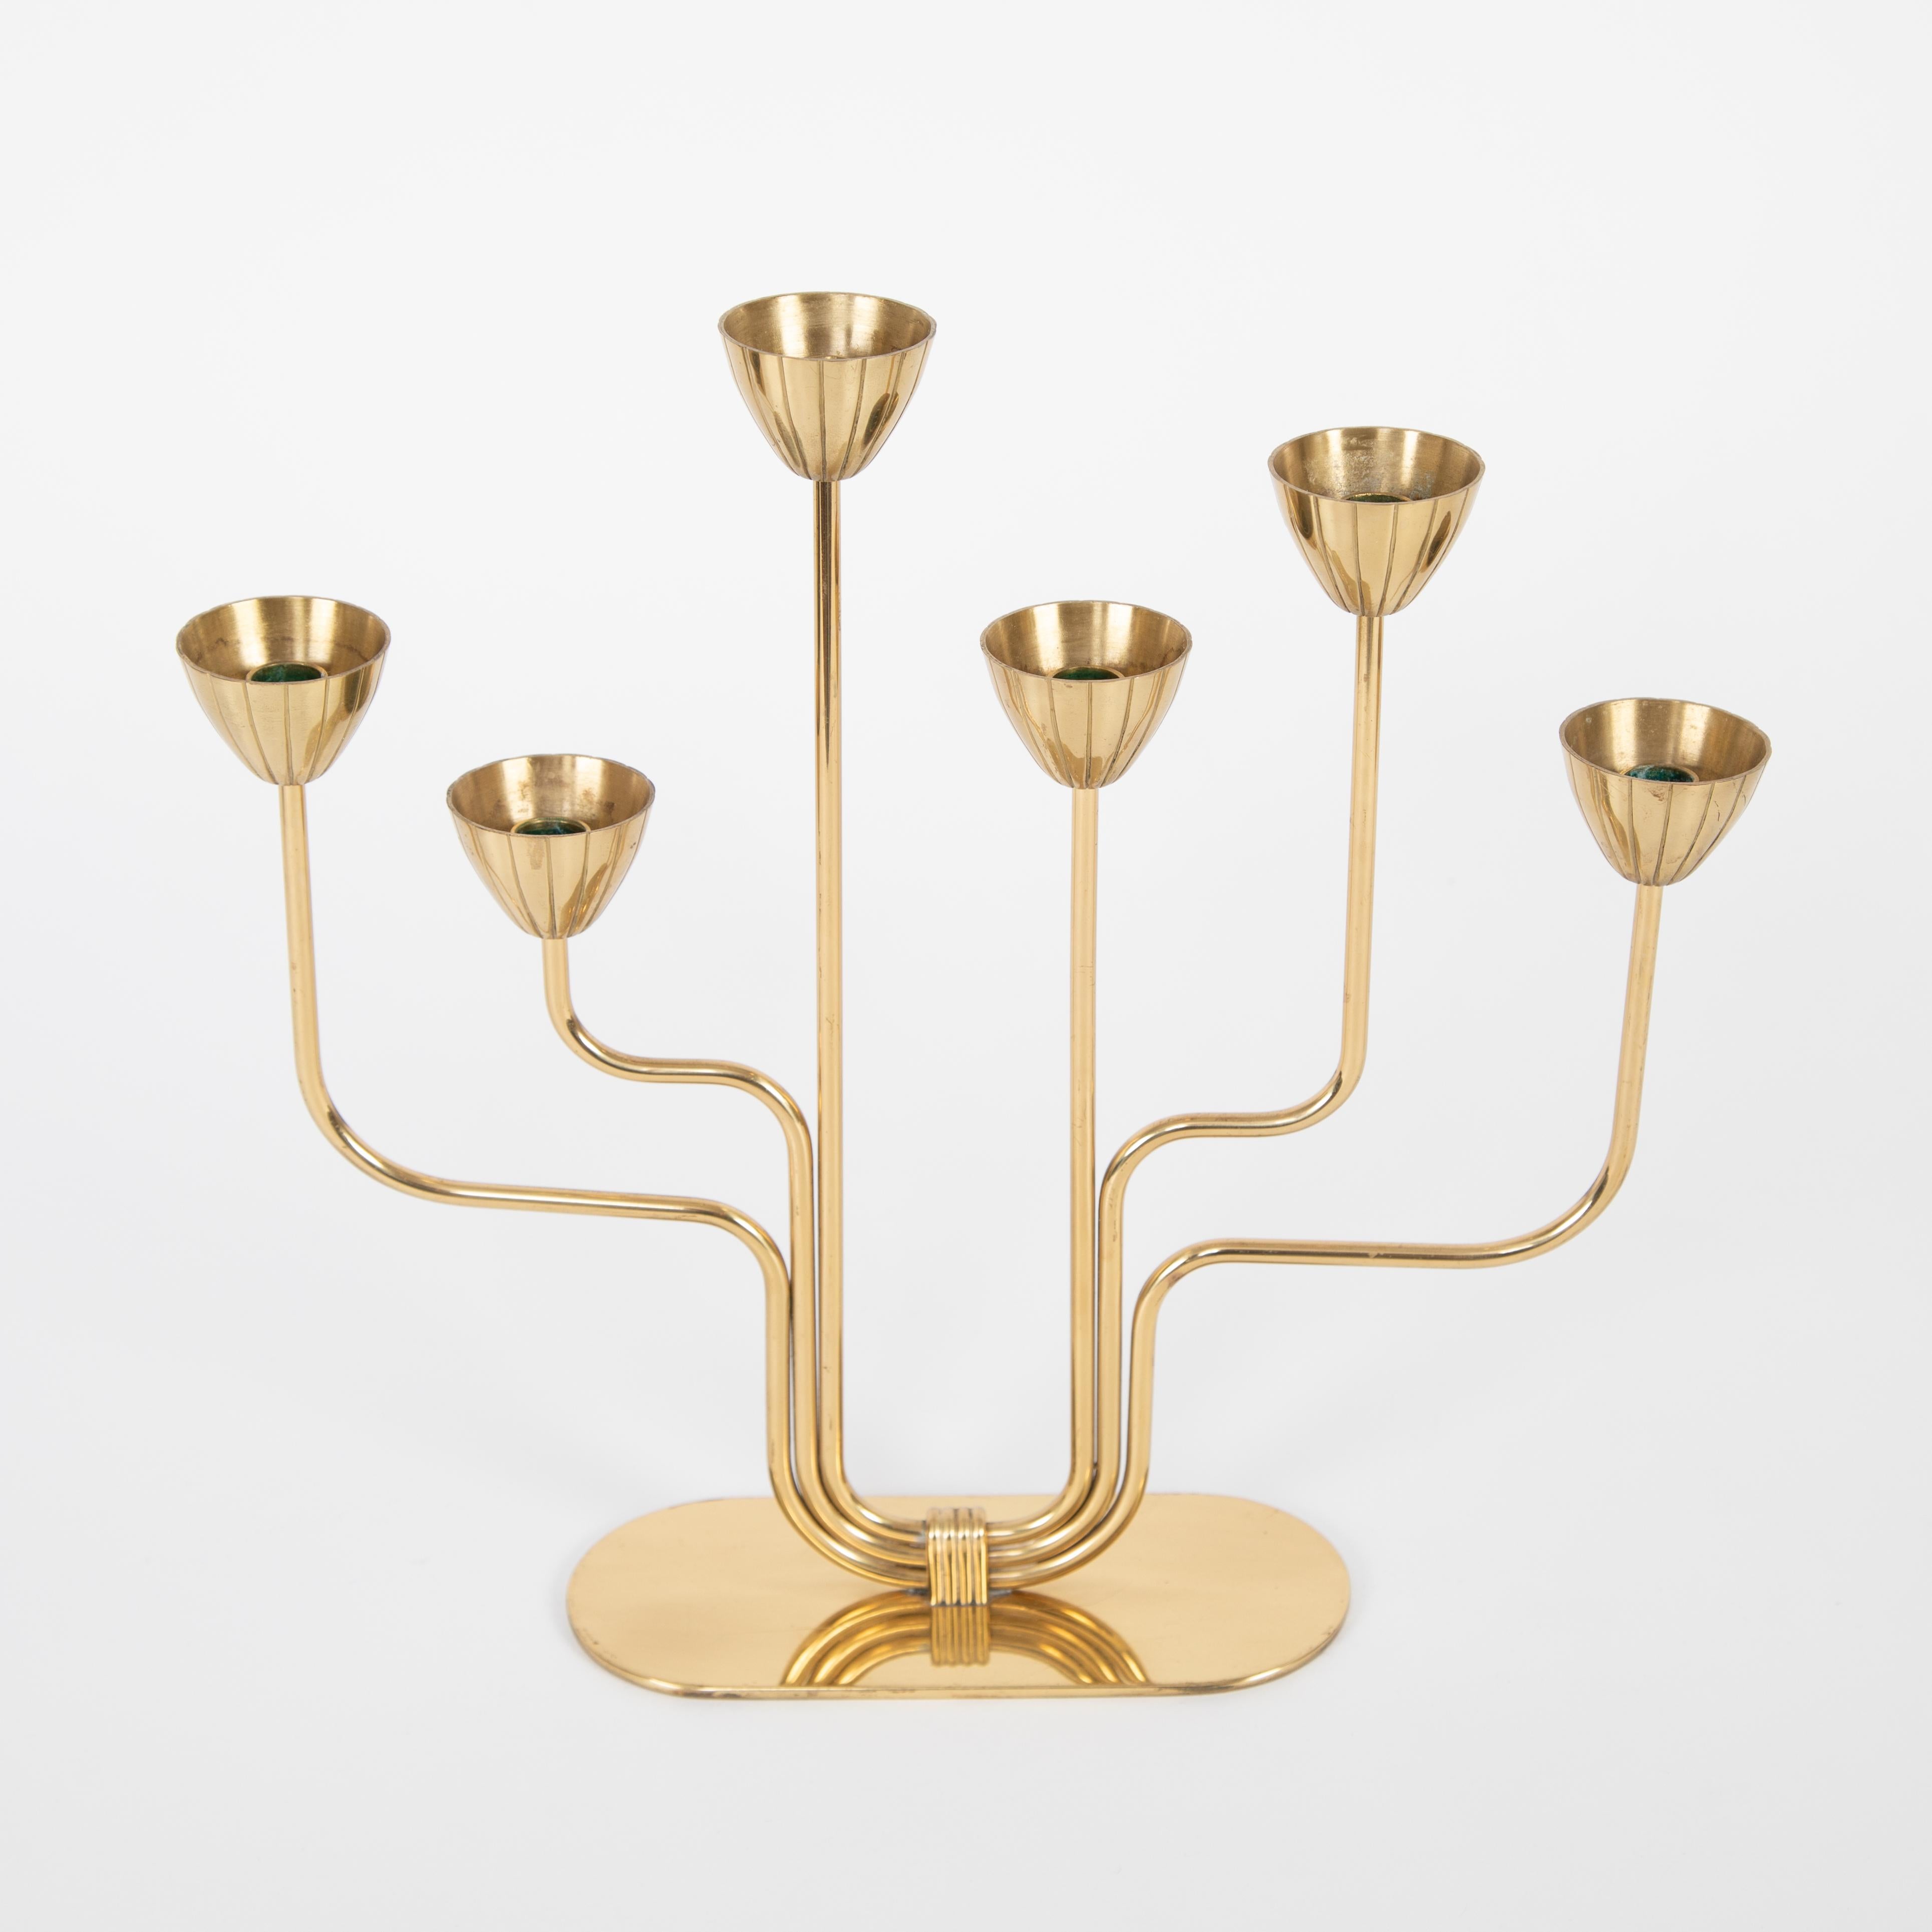 Elegant 1960s brass candelabrum designed by Gunnar Andersen for Ystad-Metall. Holds six slim 1/2-inch-diameter Swedish candles, or can be displayed without, as shown. Engraved maker's mark on bottom.


 